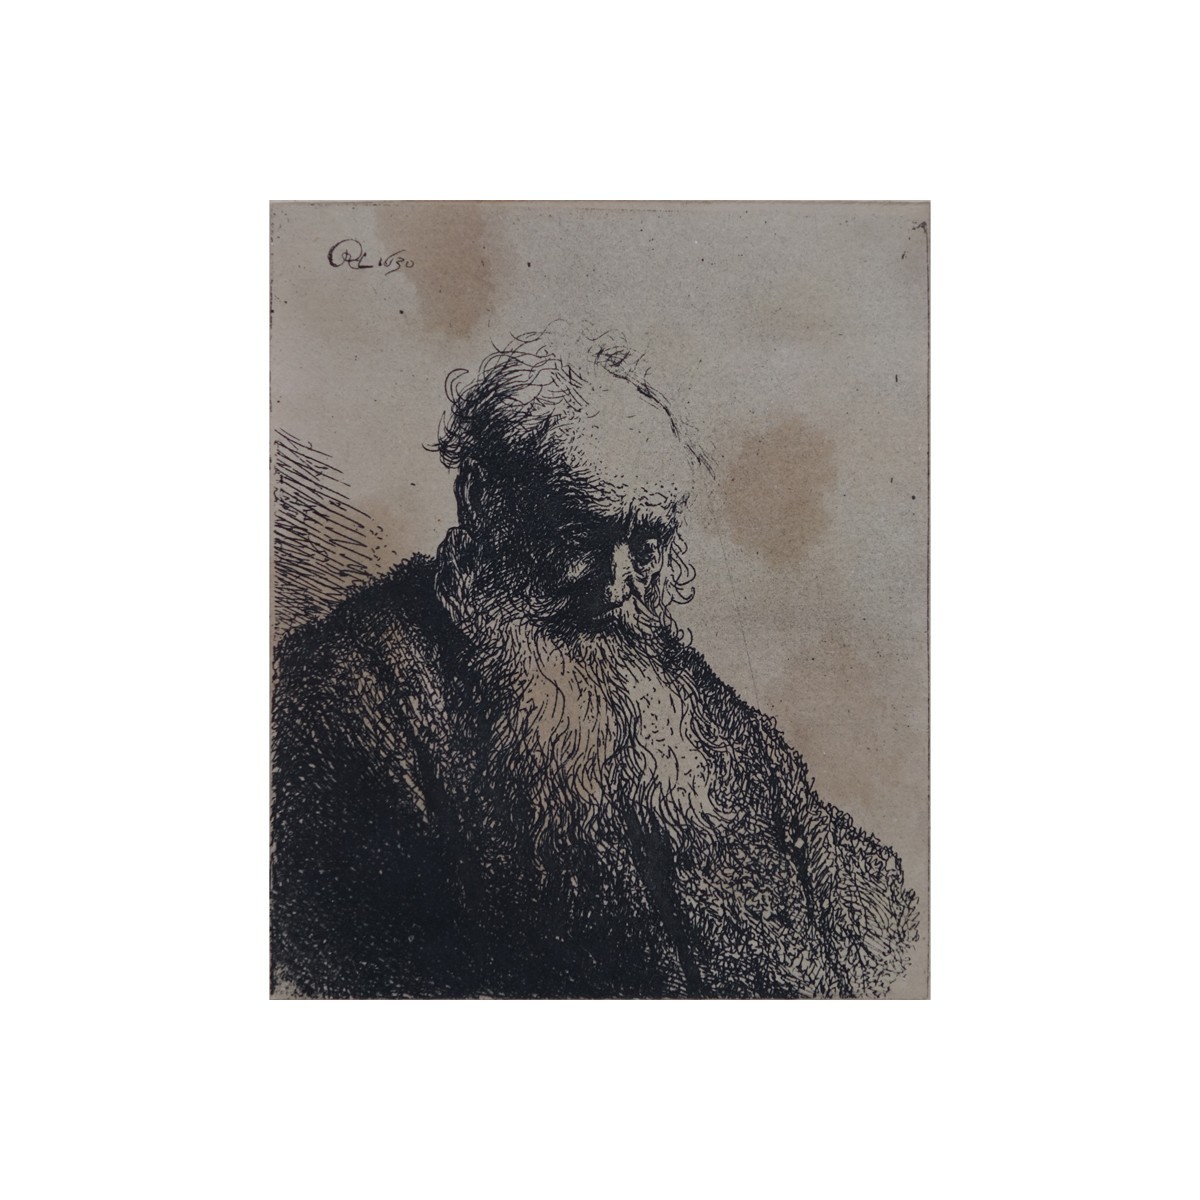 Rembrandt Van Rijn, Dutch (1606 - 1669) Etching "Bust of an Old Man with Flowing Beard: the Head Inclined Three-Quarters Right". Signed and dated 1630 in plate.